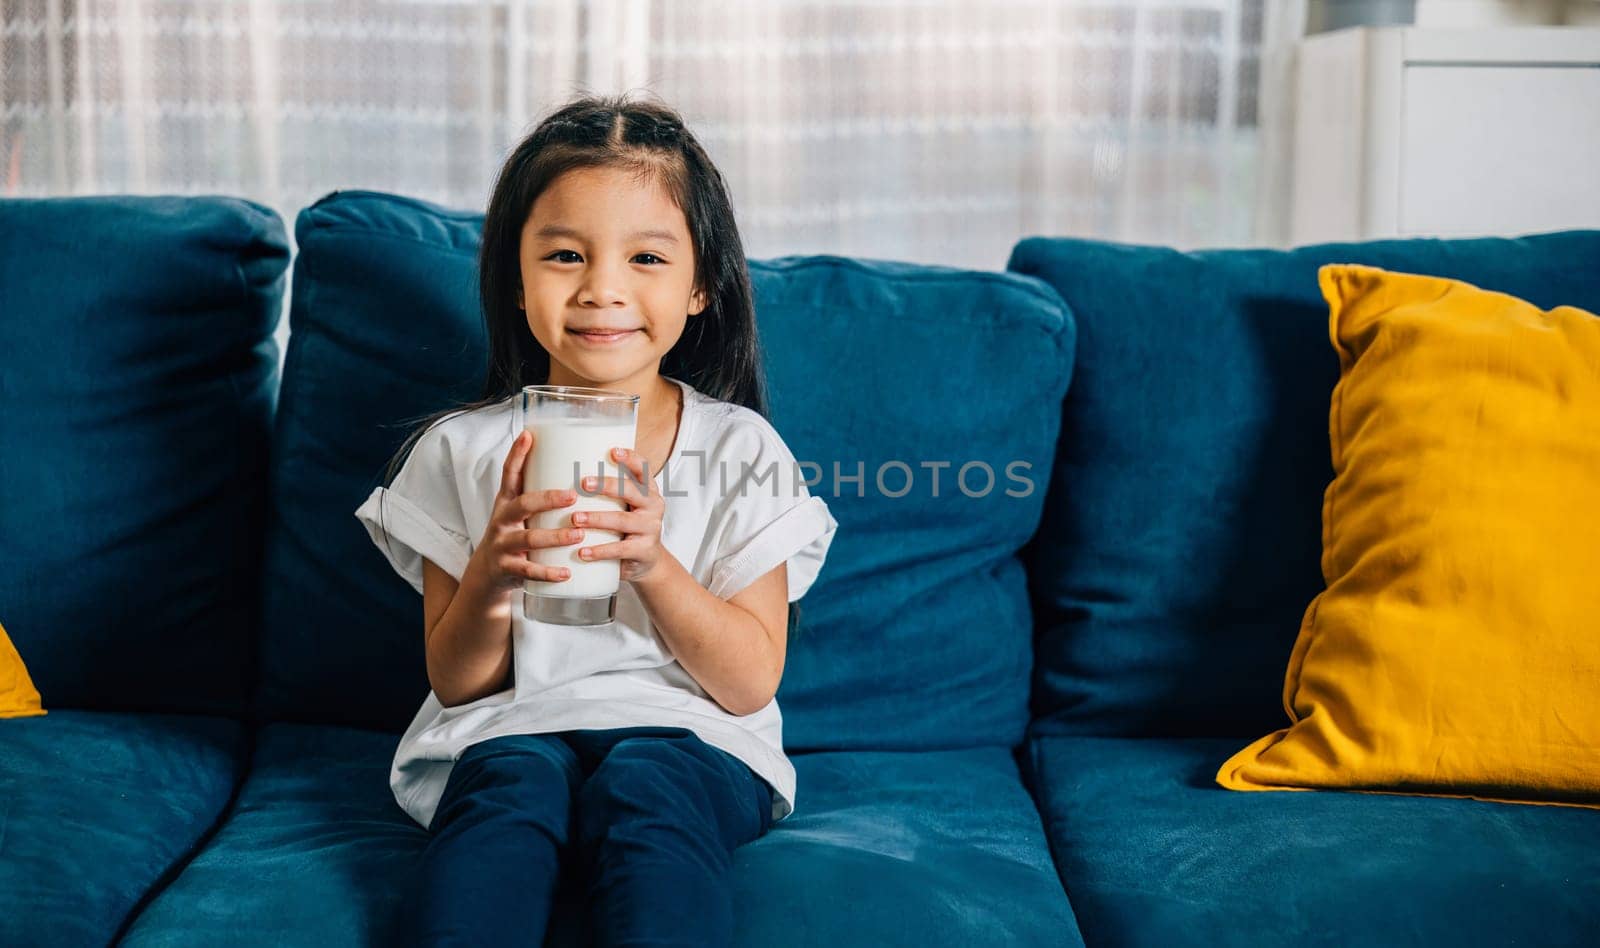 An adorable Asian child enjoys a glass of milk on the comfy sofa at home radiating happiness and innocence. This snapshot captures the essence of daily health care and nutrition in childhood.